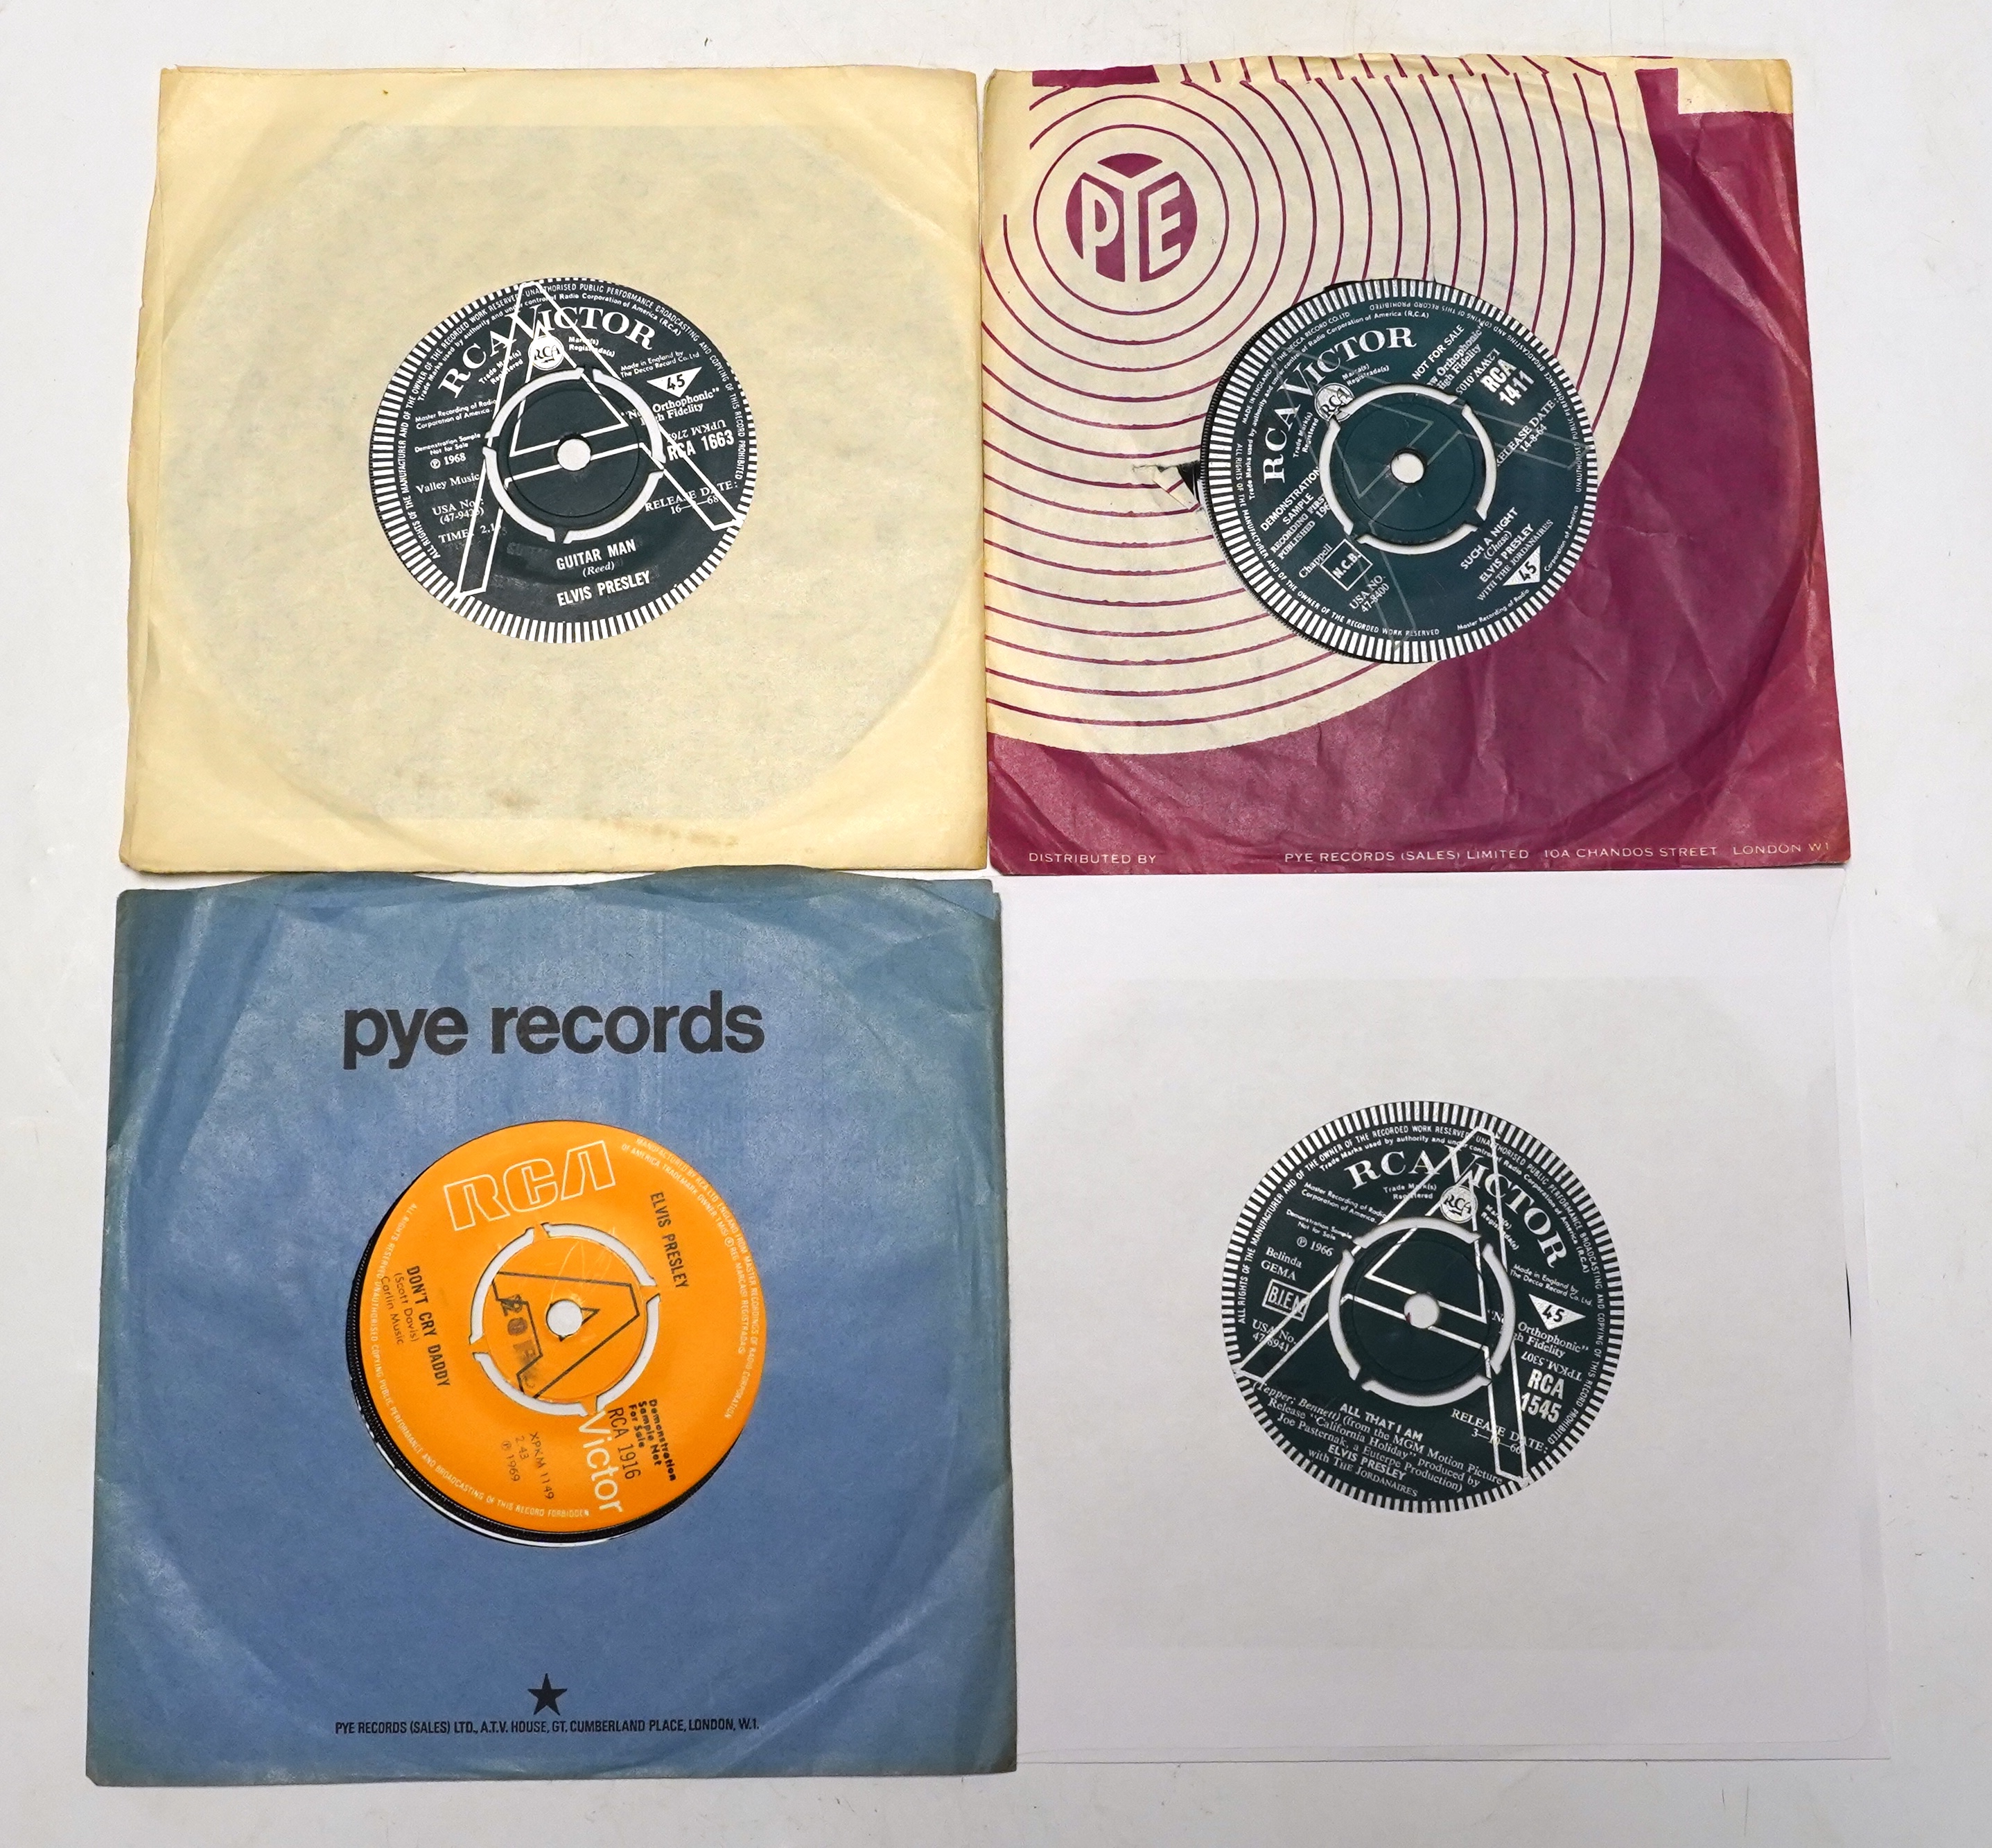 Four Elvis Presley original RCA Victor Demonstration Record 7” singles; All That I Am/Spinout (release date 13-10-66), Such A Night/Never Ending (release date 14-8-64), Guitar Man/Hi Heel Sneakers (release date 16-2-68),